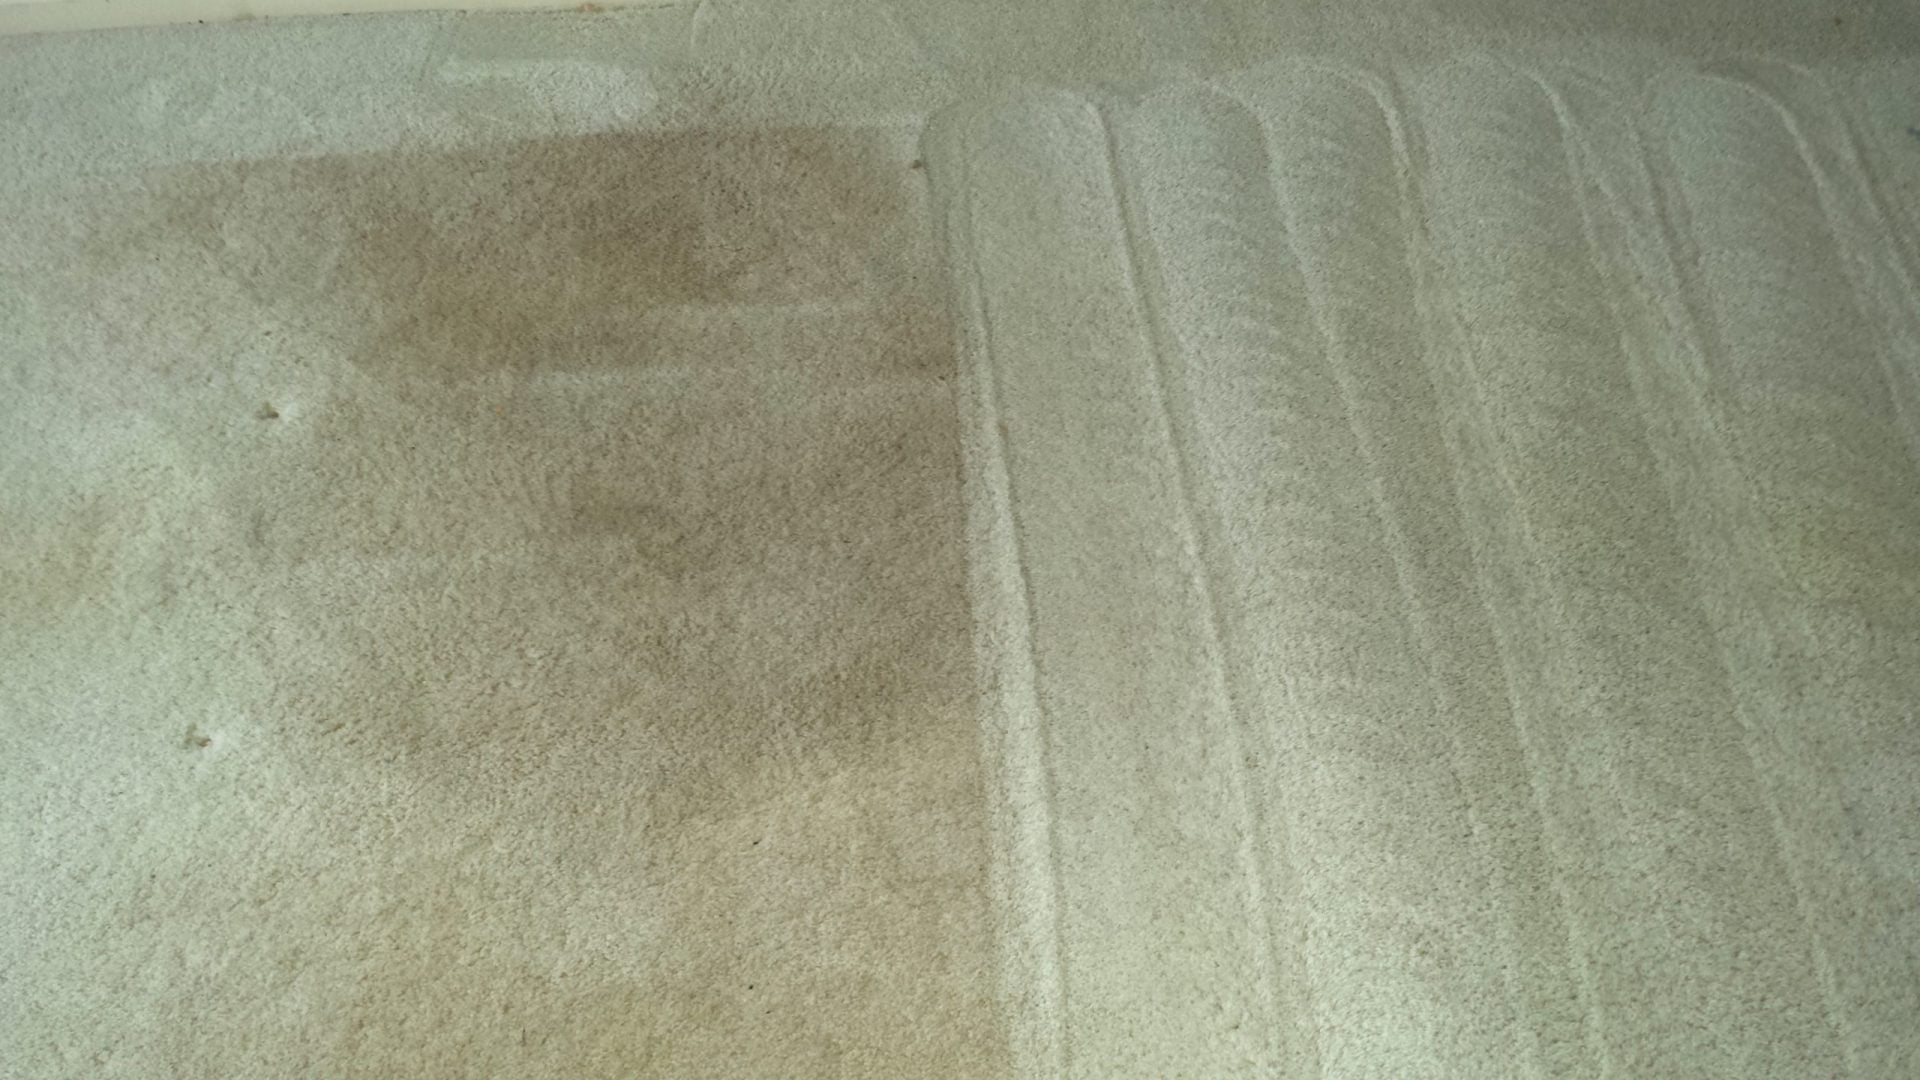 Clean Urine From Carpet